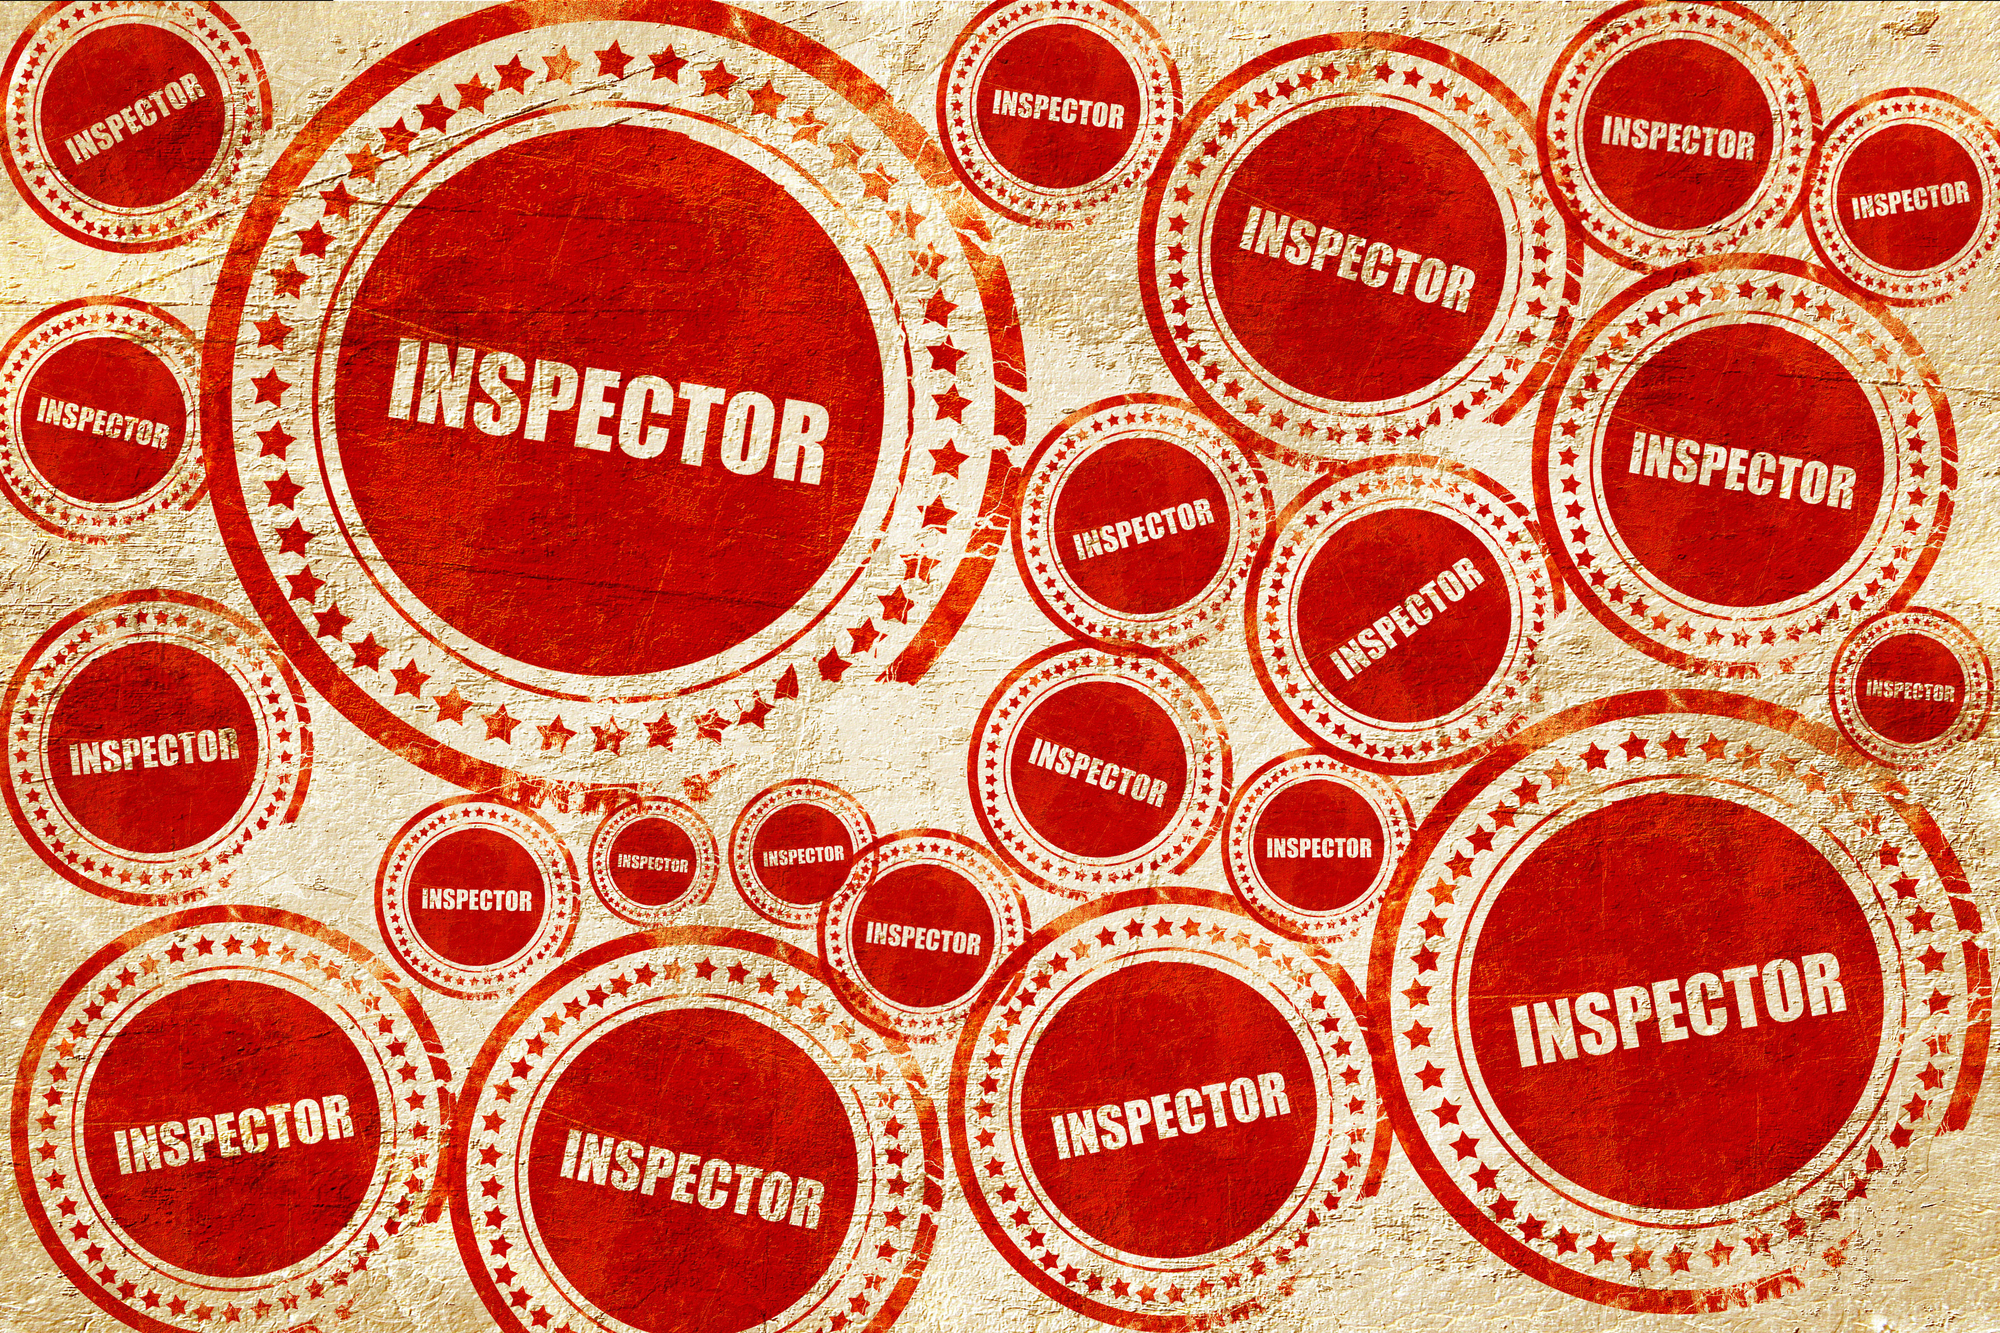 inspector, red stamp on a grunge paper texture